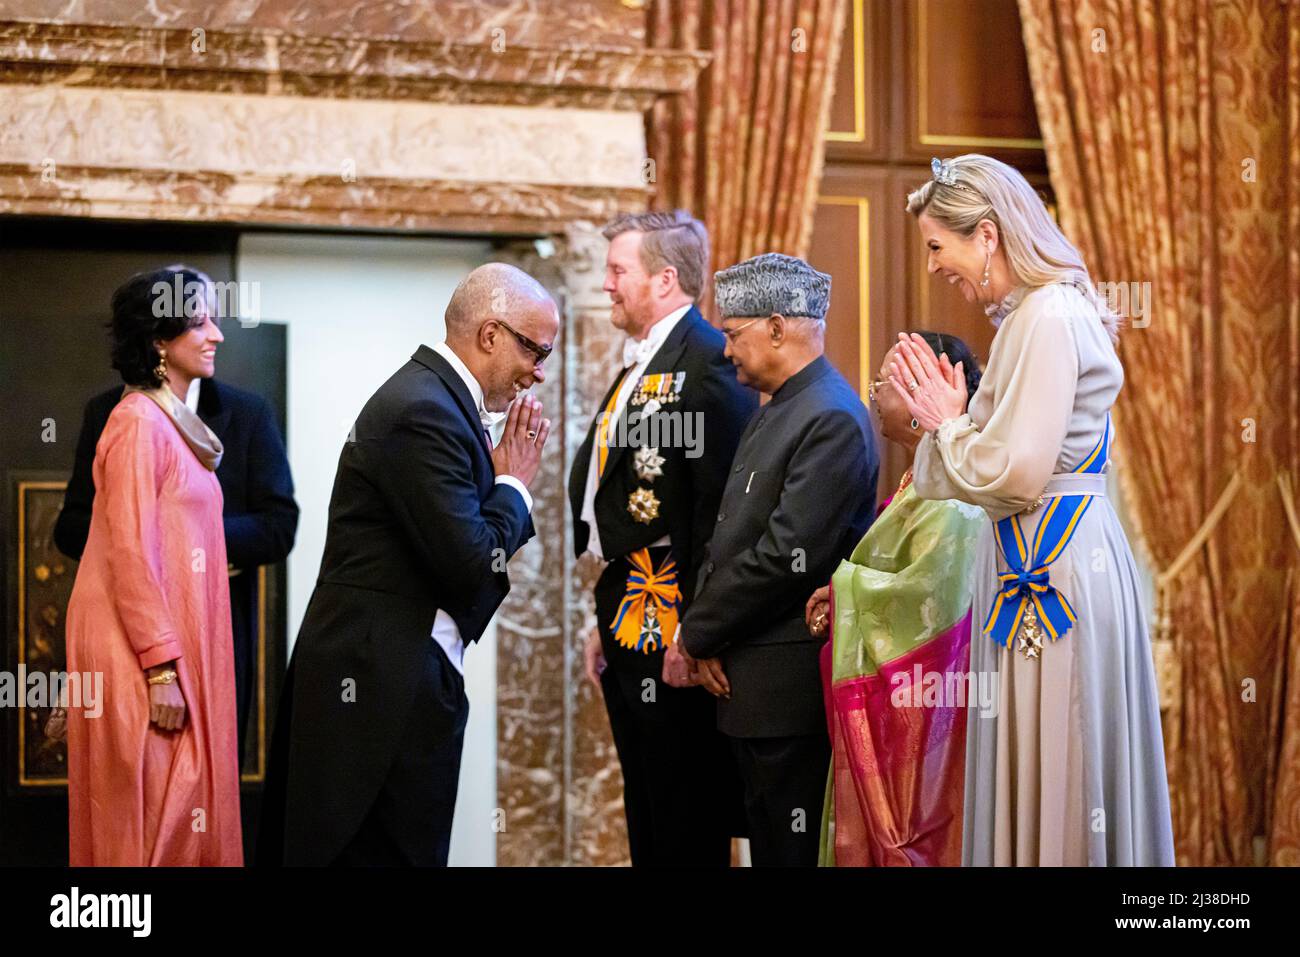 the Netherlands. 05-04-2022 Gala Queen Maxima and King Willem-Alexander with the President of the republic of India, Ram Nath Kovind and his wife, Savita Kovind, during the state banquet at the Dam palace, Paleis op de Dam, in Amsterdam on the 1st day of the 2 day statevisit to the Netherlands.   ( Photo by PPE/Sipa USA) Stock Photo